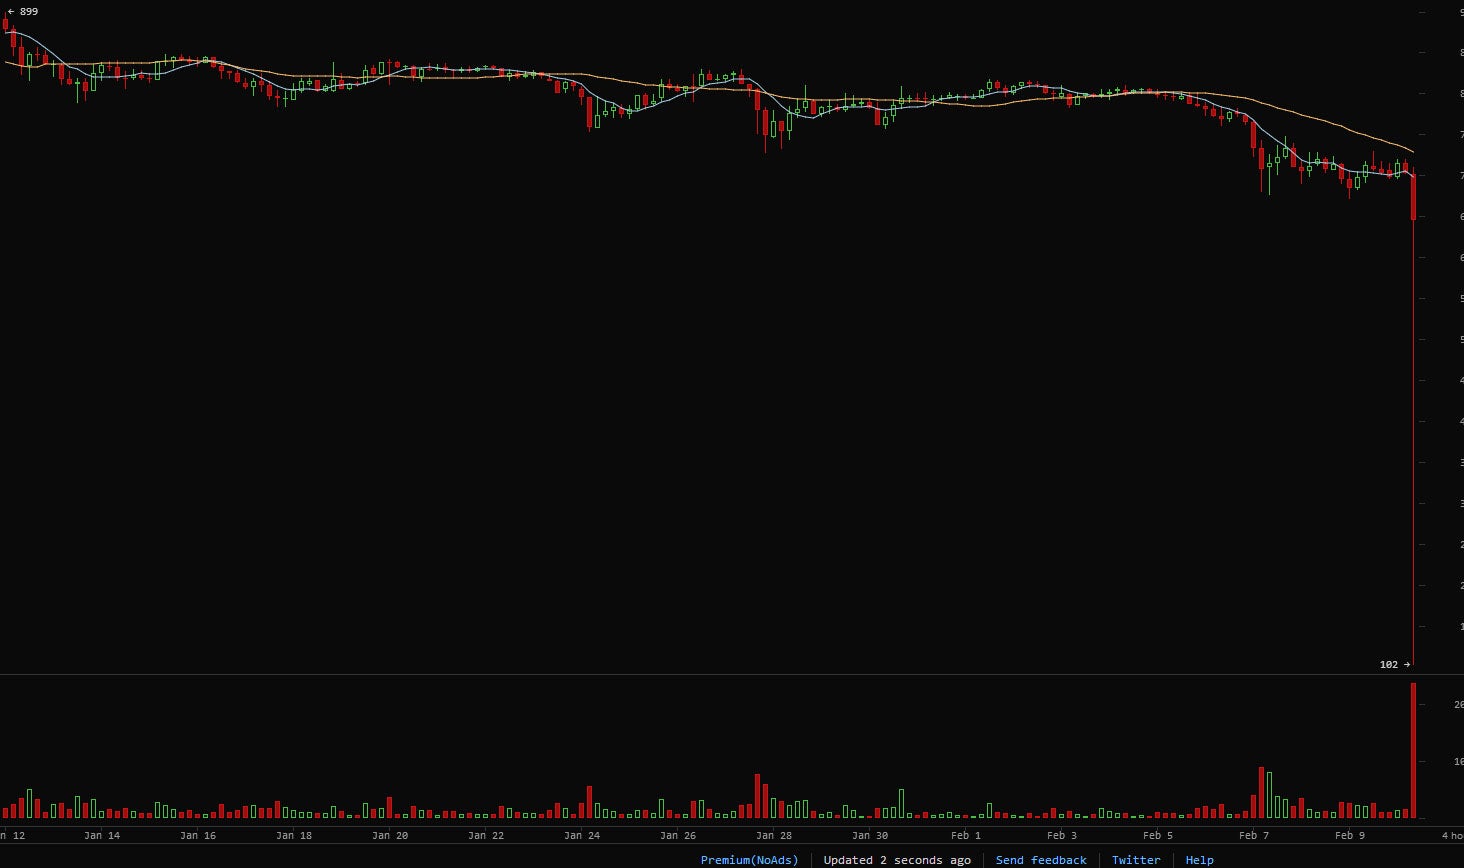 Bitcoin's value nose-dived following the news from Mt. Gox. Image credit: BitcoinWisdom.